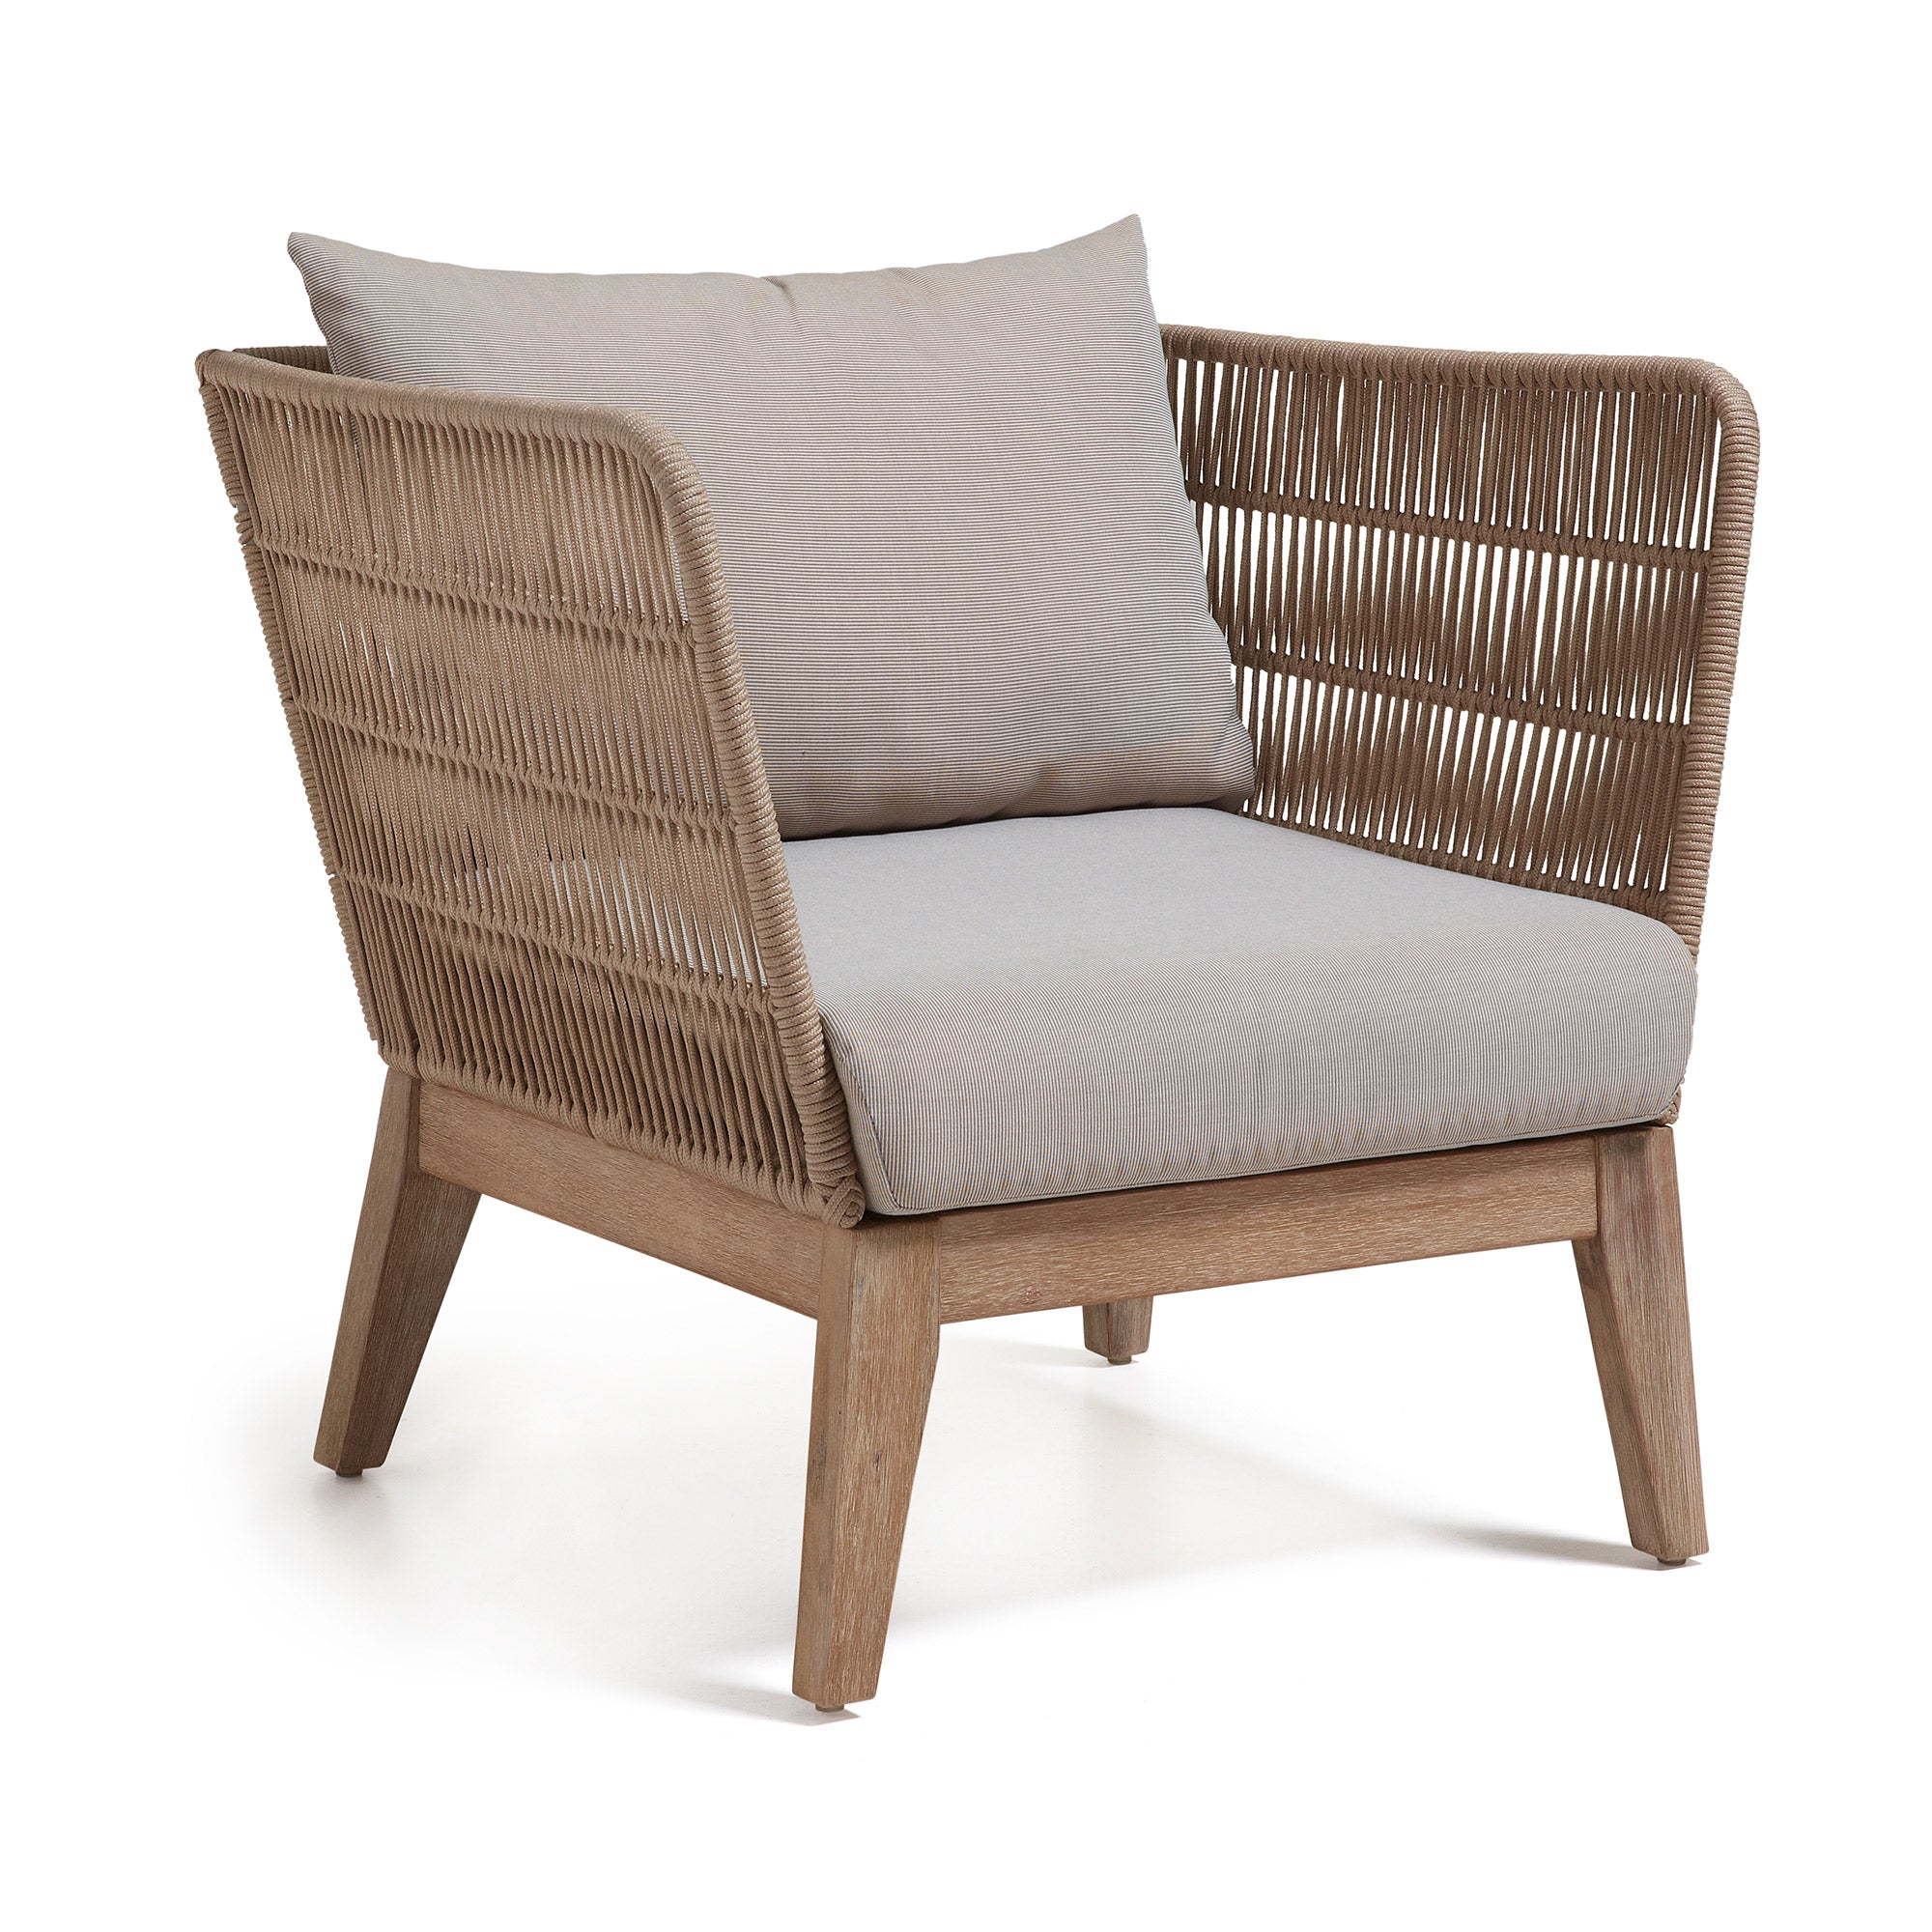 Belleny armchair in beige cord and solid acacia wood, 100% FSC